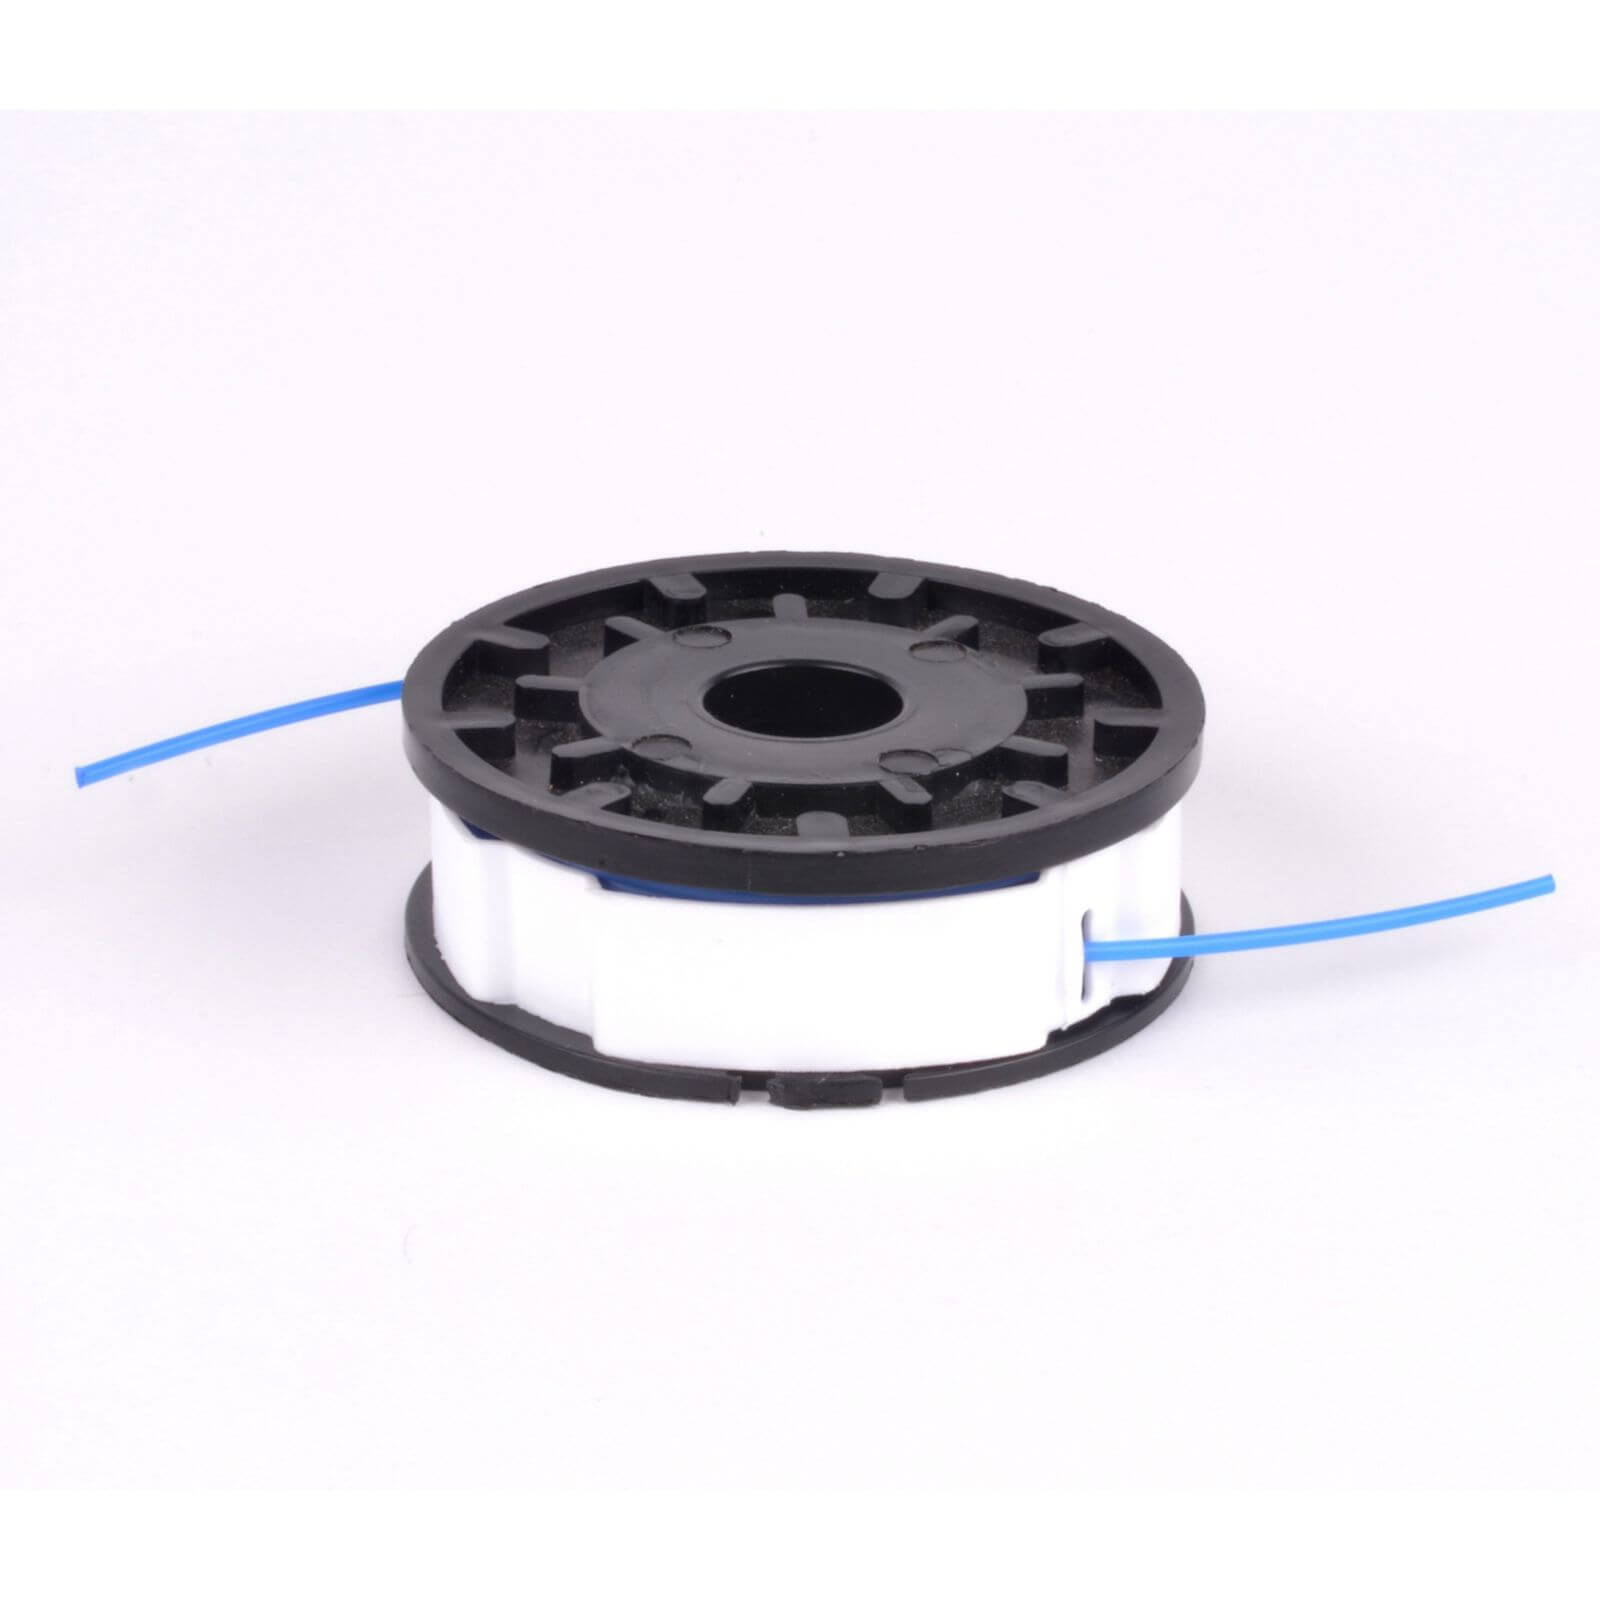 ALM Spool & Line for Qualcast GT2826